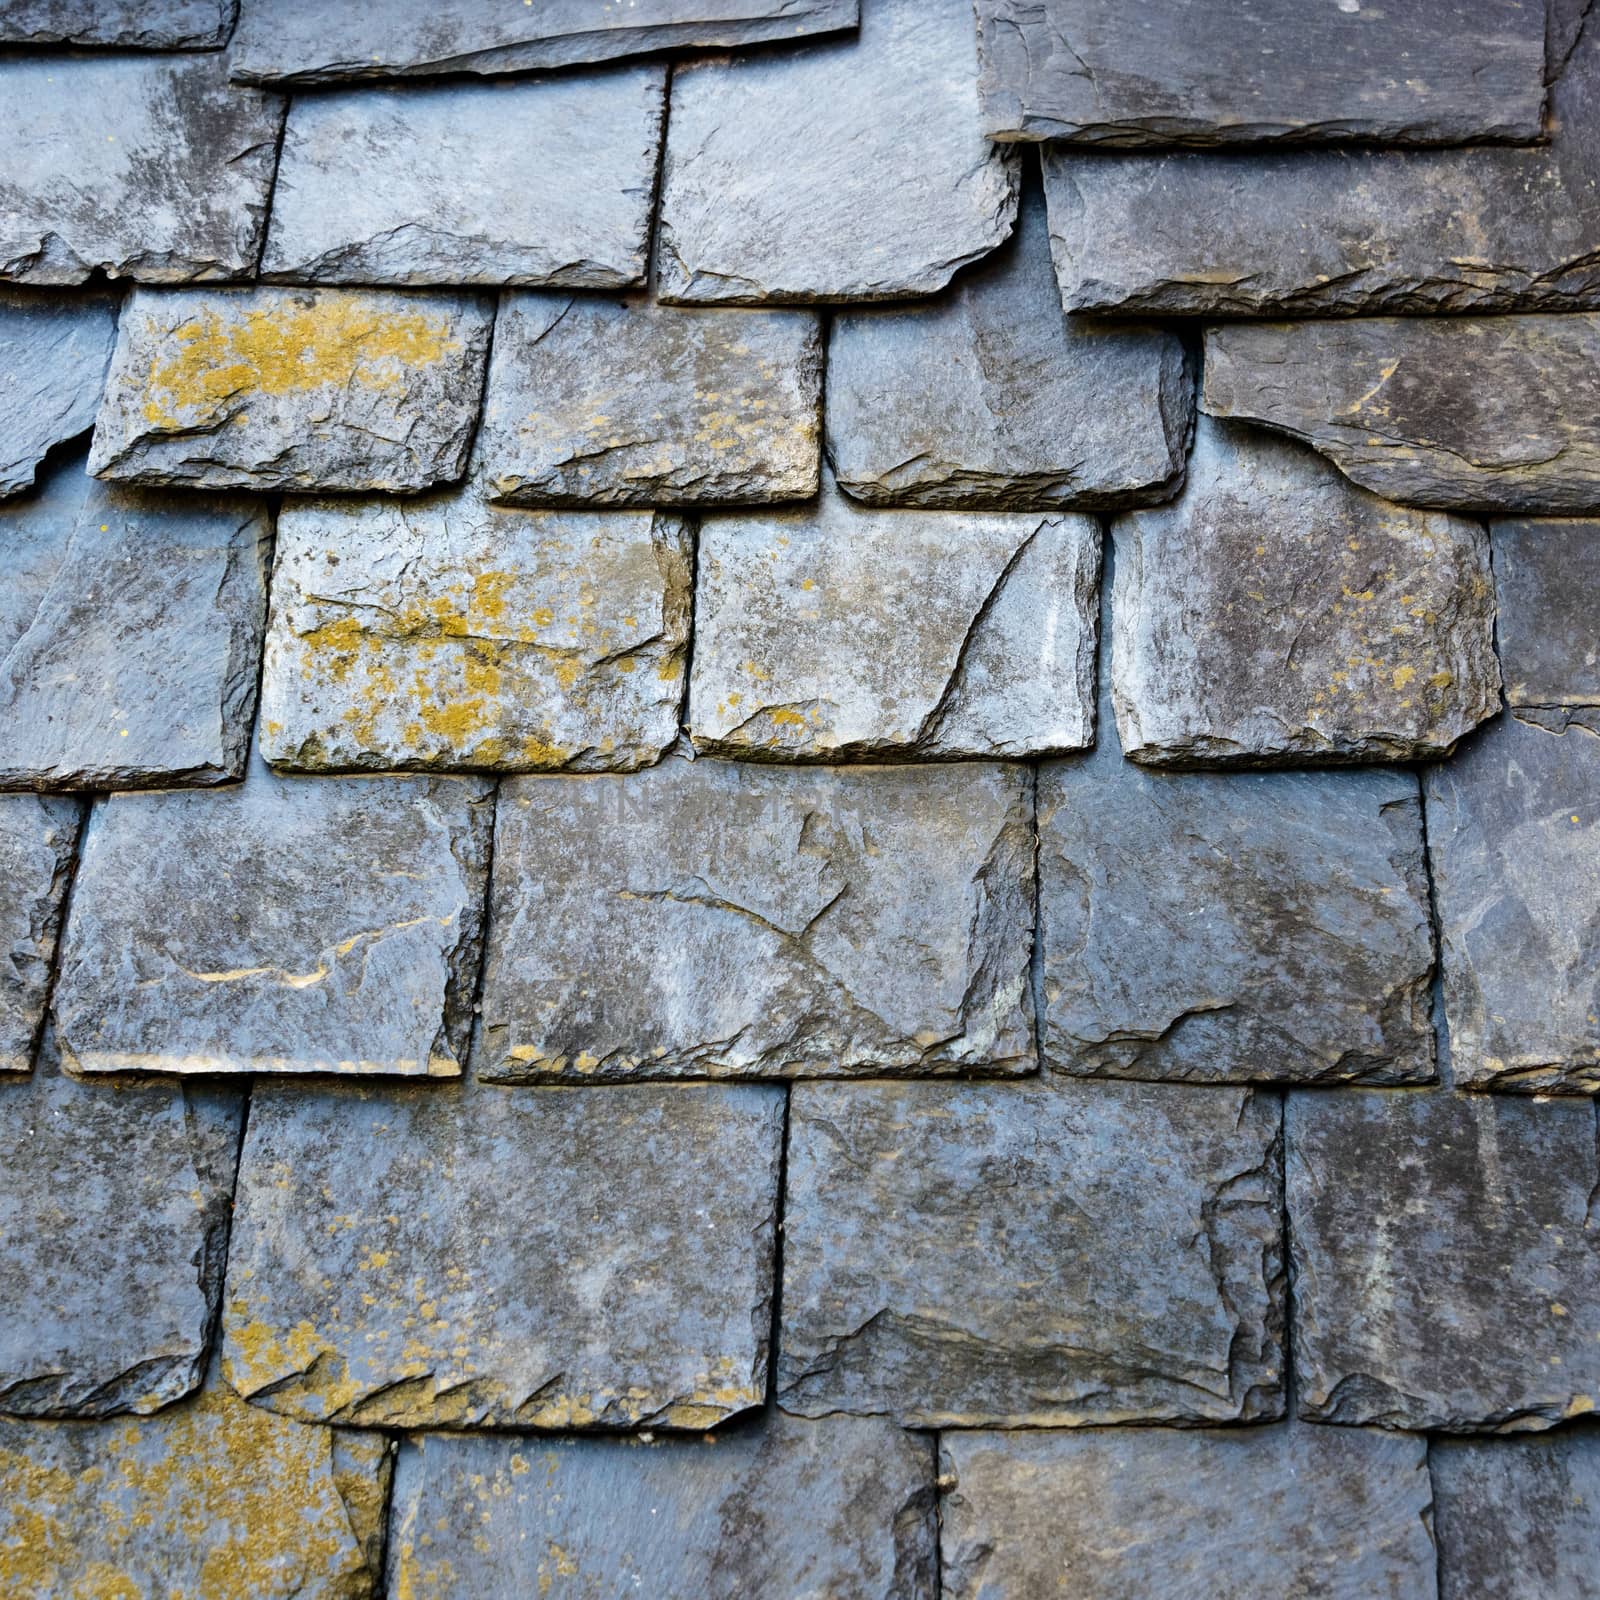 Slate roof detail, some of the slates covered by lichen